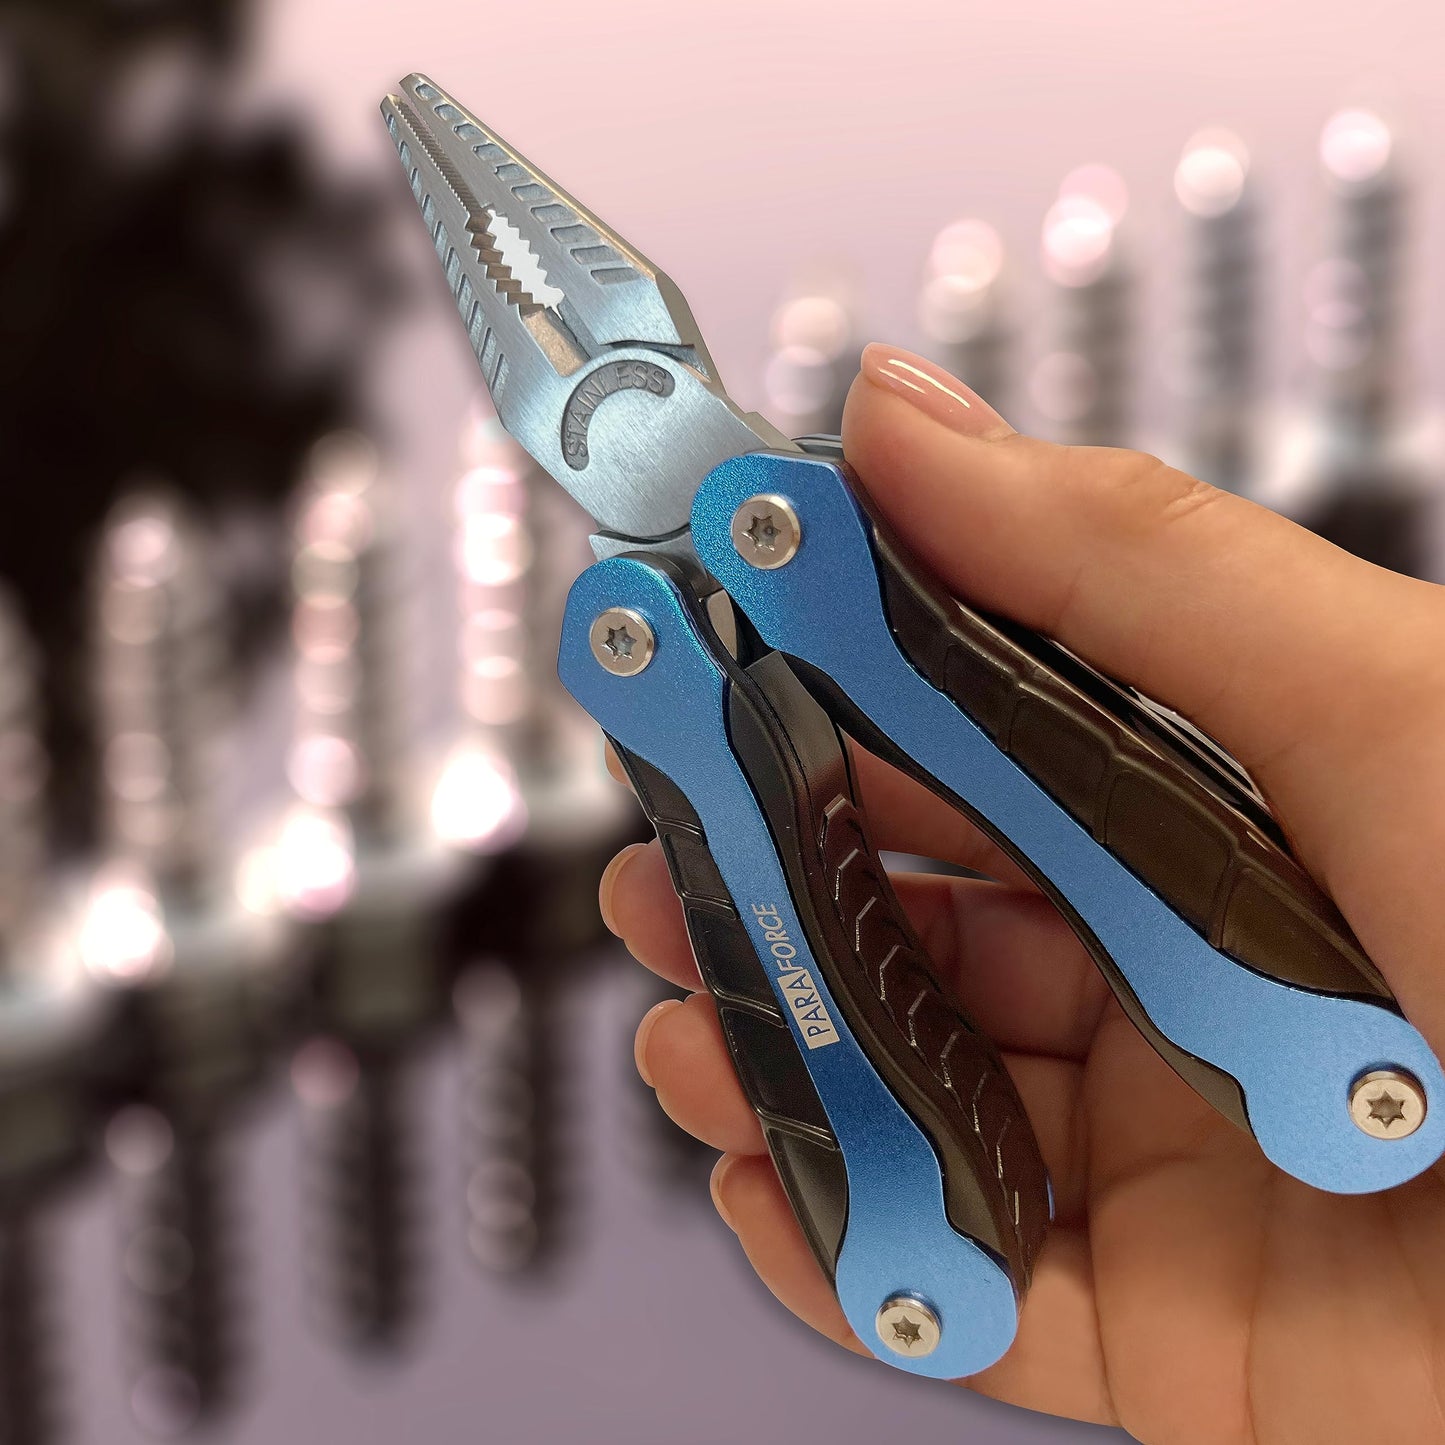 ParaForce 15 Function Multitool - 15-in-1 Outdoor Multitool with Pliers - Pocket Pliers for Fishing, Hunting & Camping - Foldable Pliers with Knife, Fish Scaler, Hook Remover & Wire Cutters